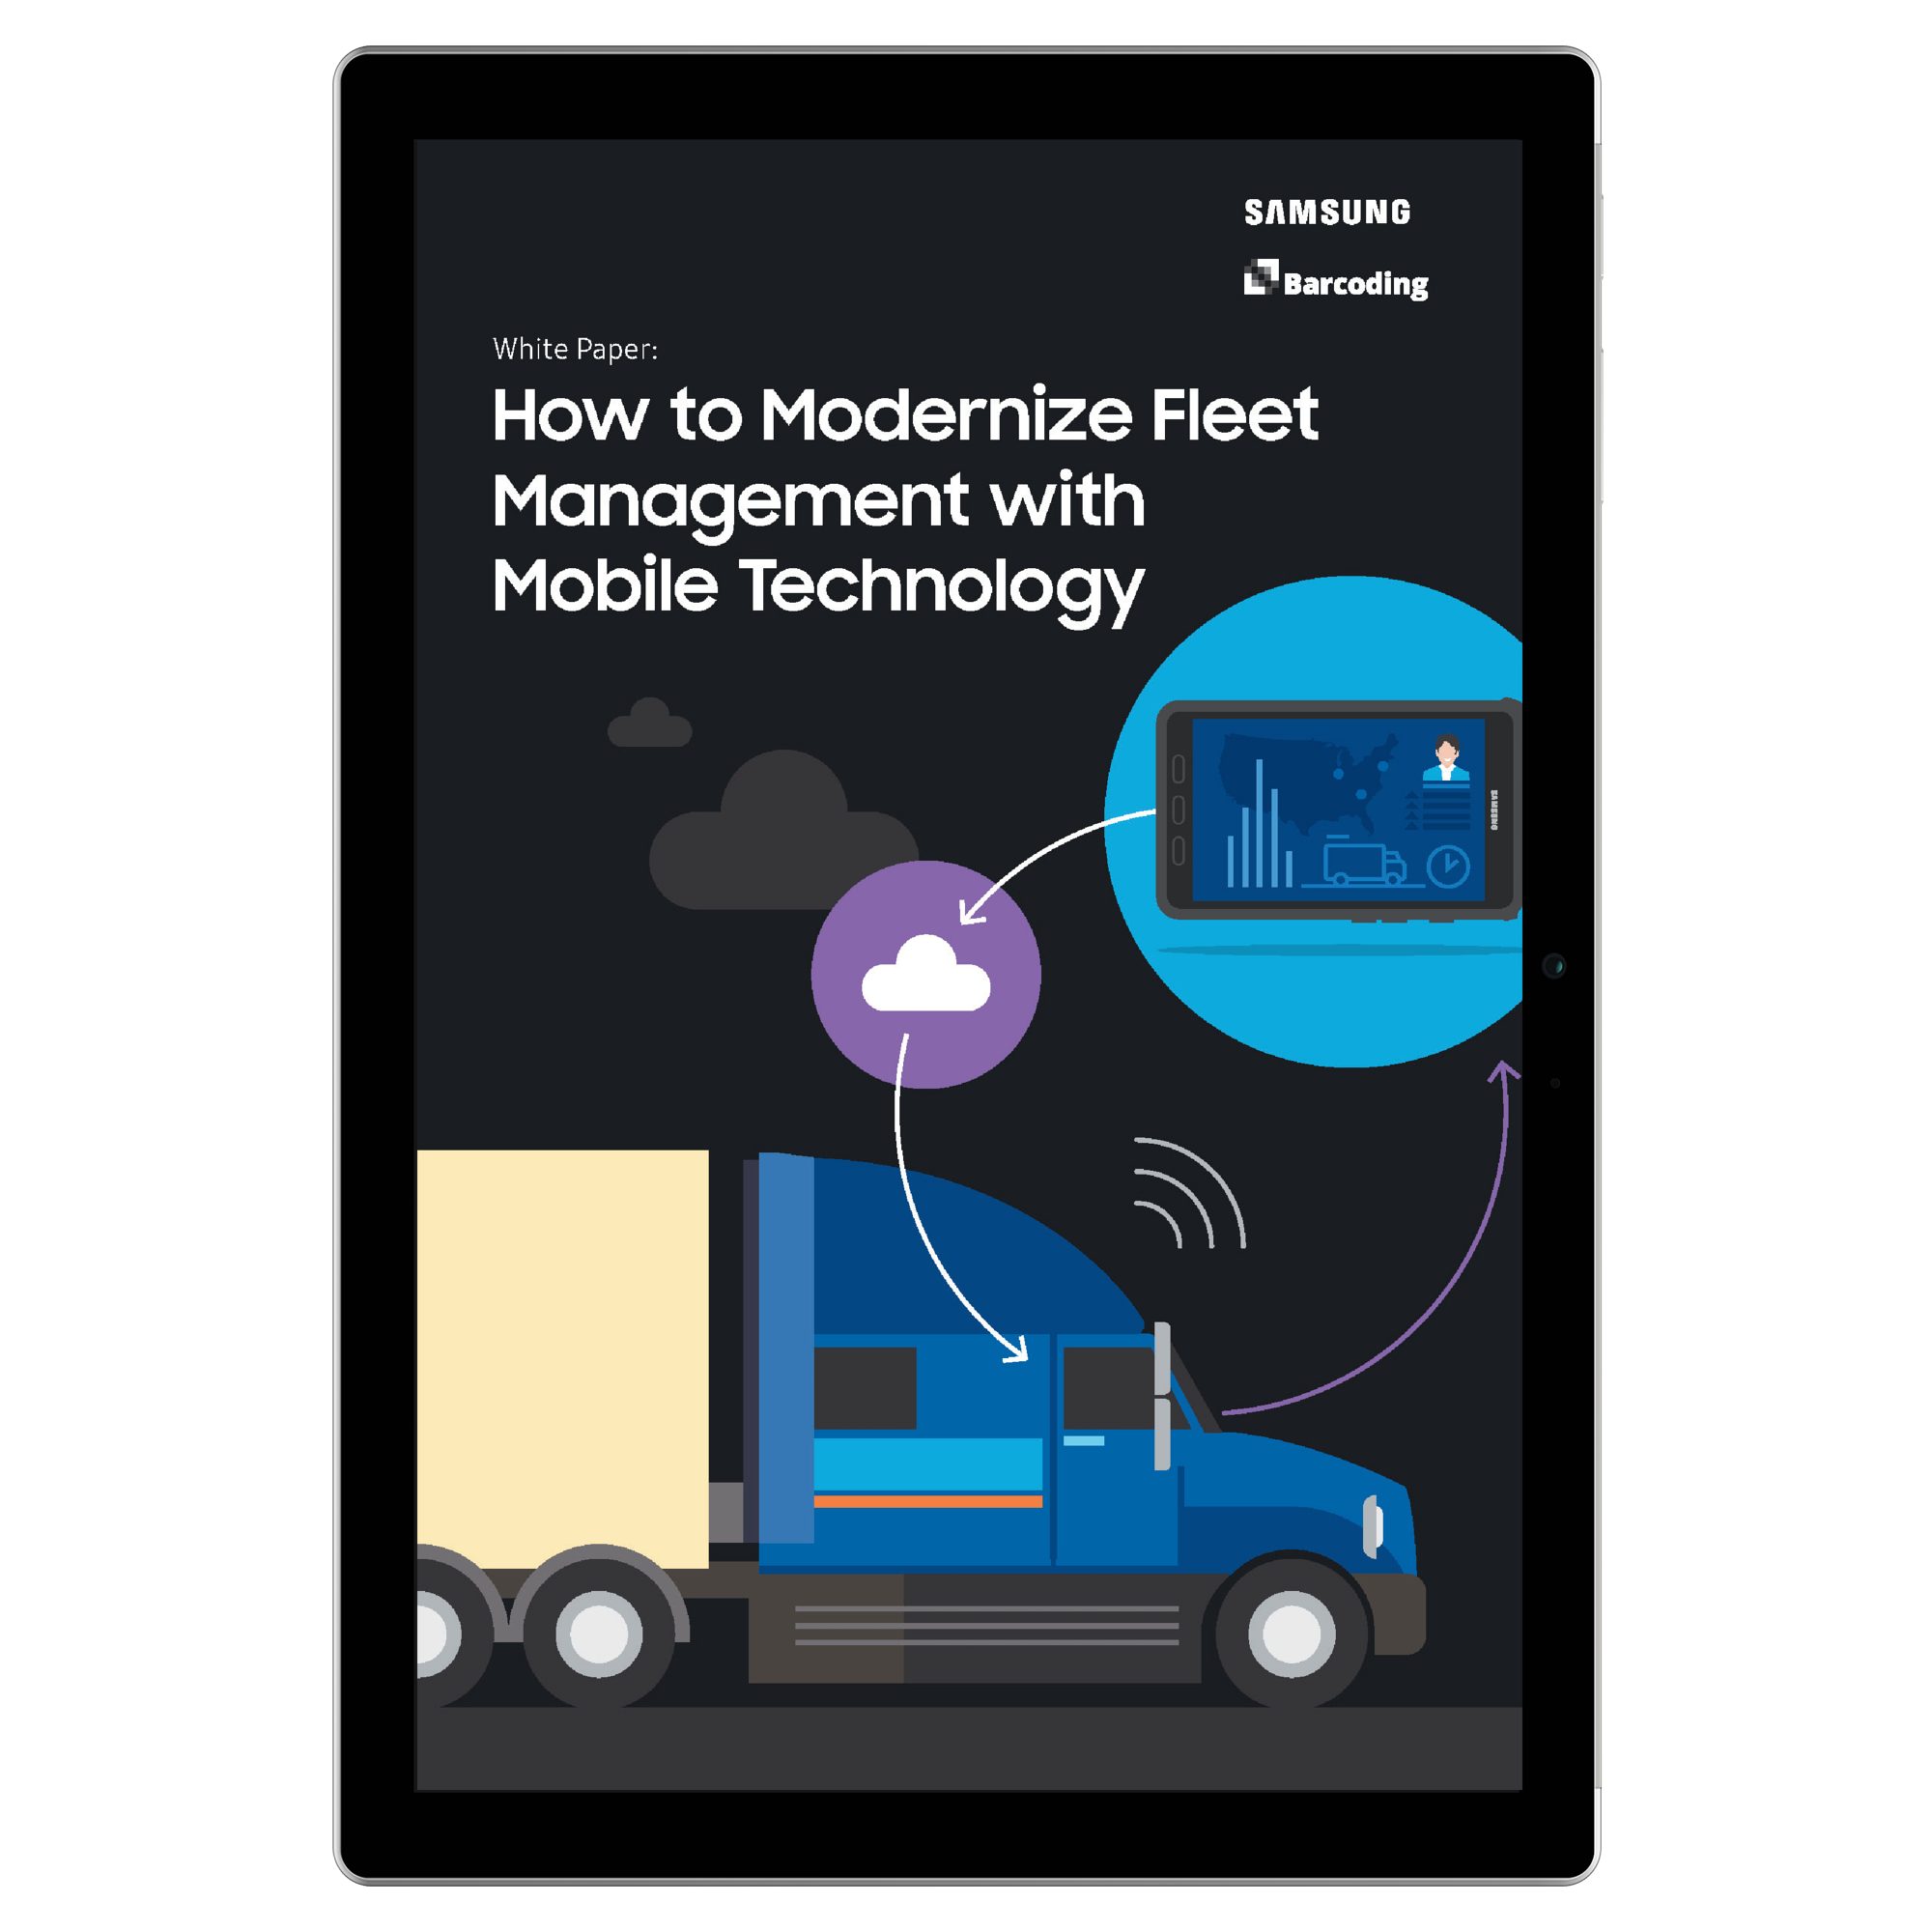 How to Modernize Fleet Management with Mobile Technology